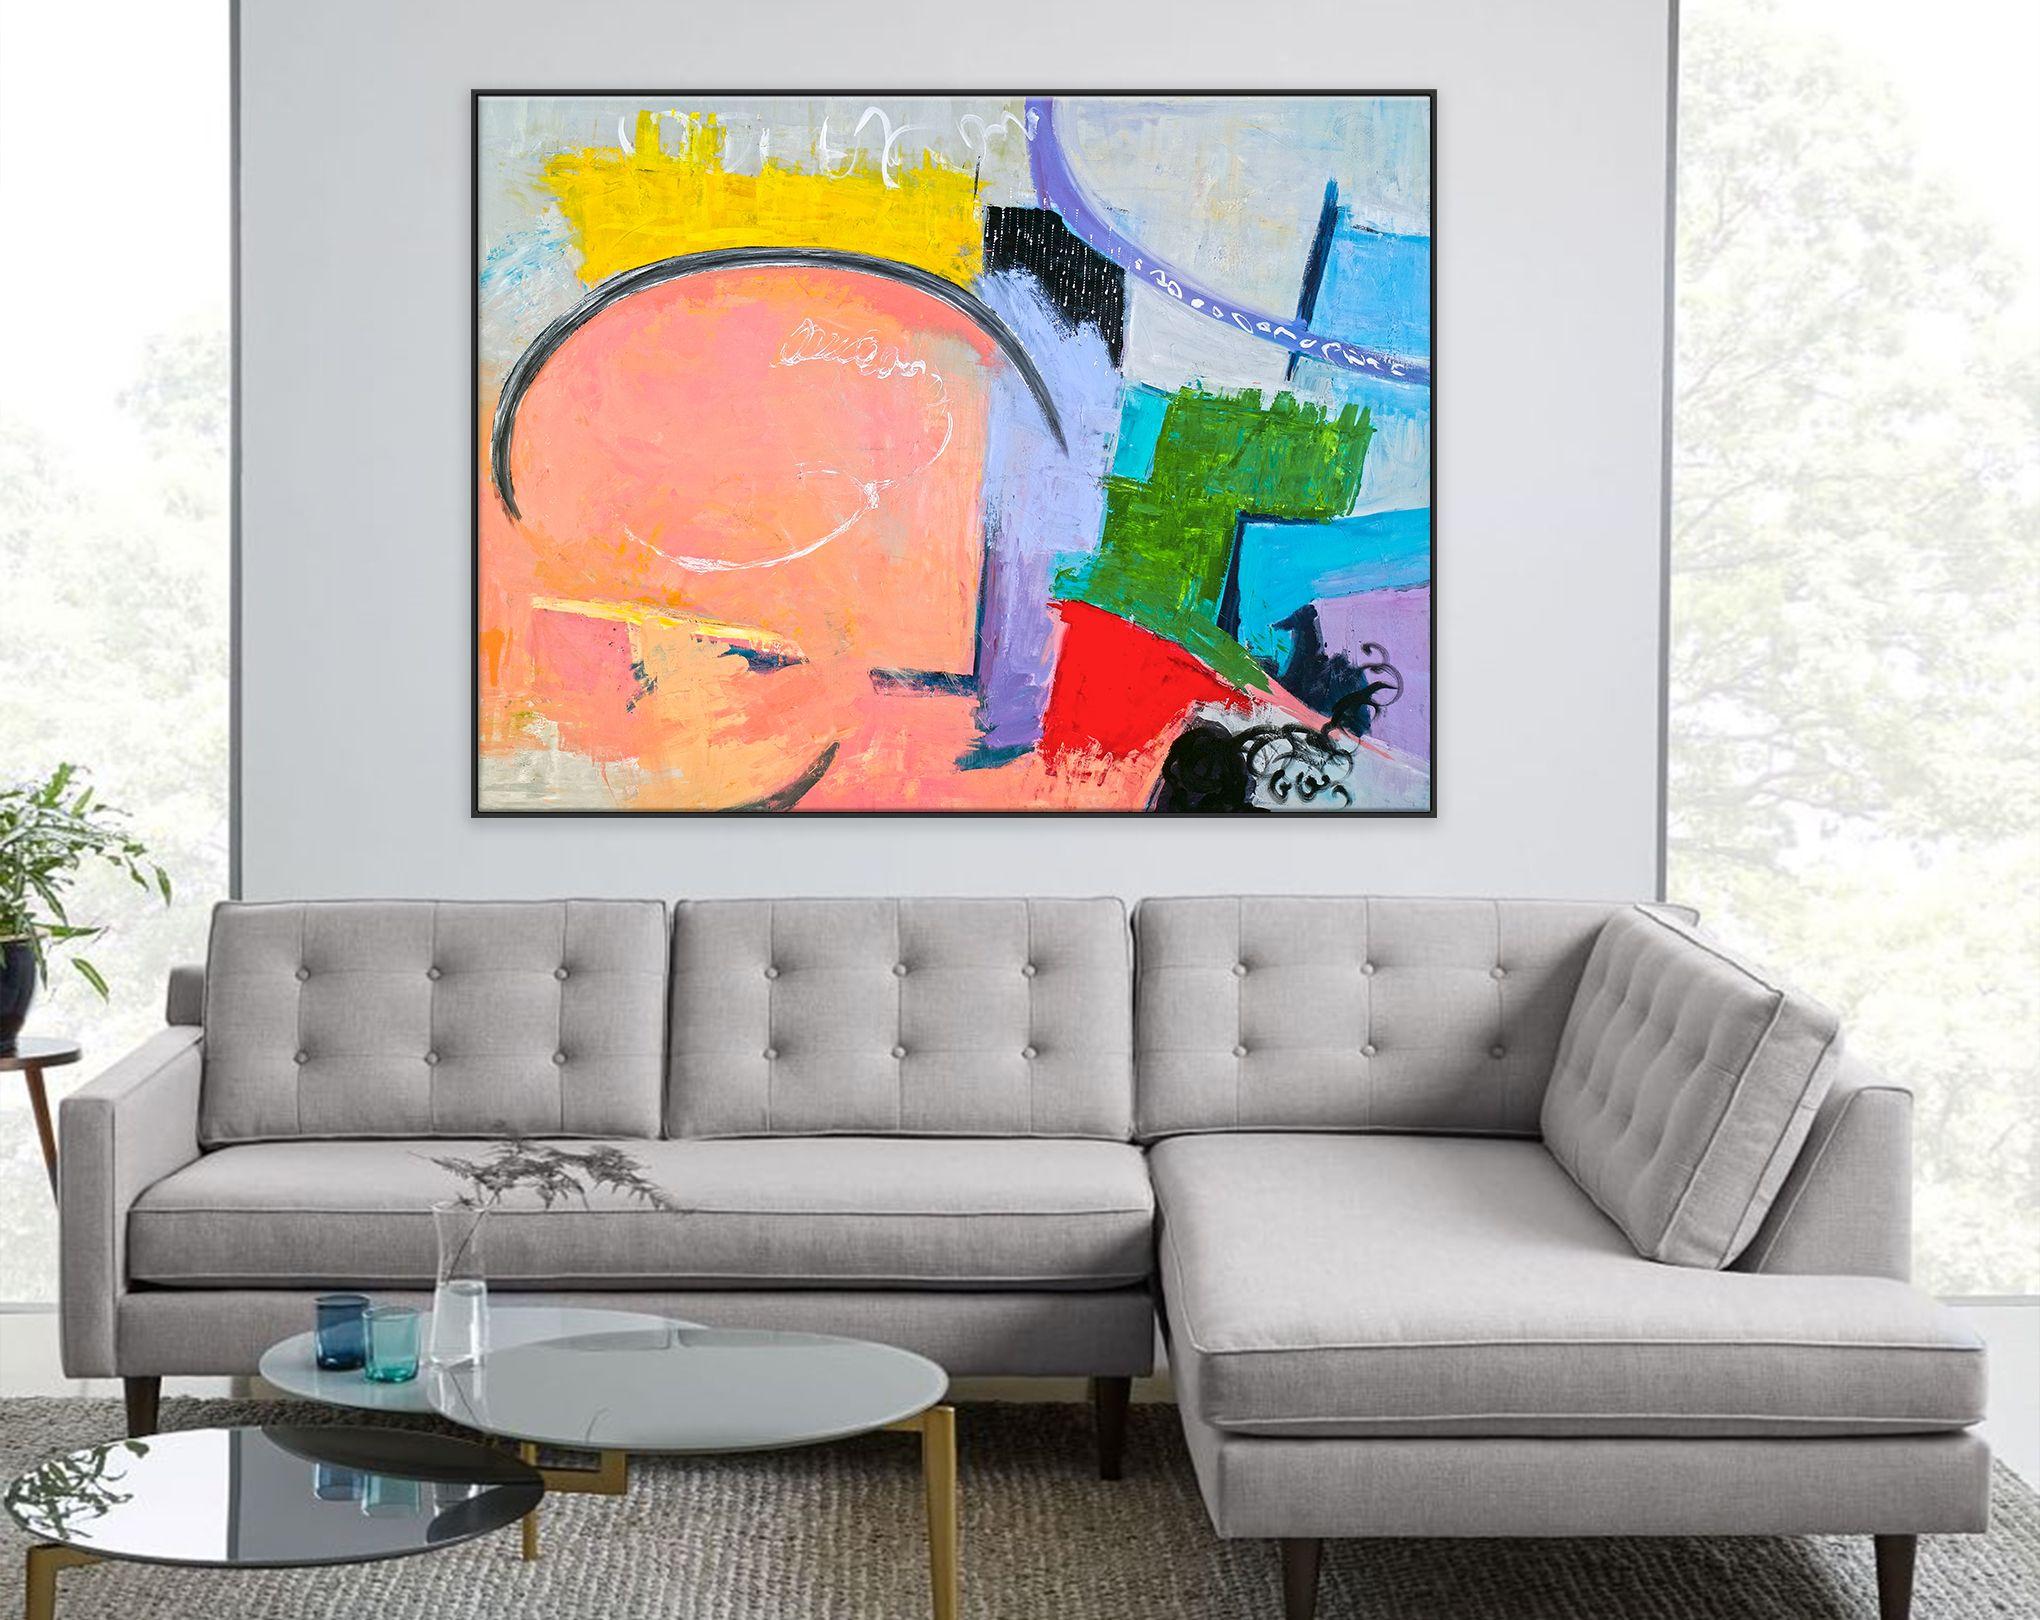 This is a playful improvisation composition of abstract expressionism. â€¢ PICTURE HANGER ATTACHED: Yes â€¢ SIDES PAINTED: Yes â€¢ READY TO HANG: Yes â€¢ ARTIST SIGNED: Yes â€¢ CERTIFICATE OF AUTHENTICITY: Yes, This is an Original Painting Not a